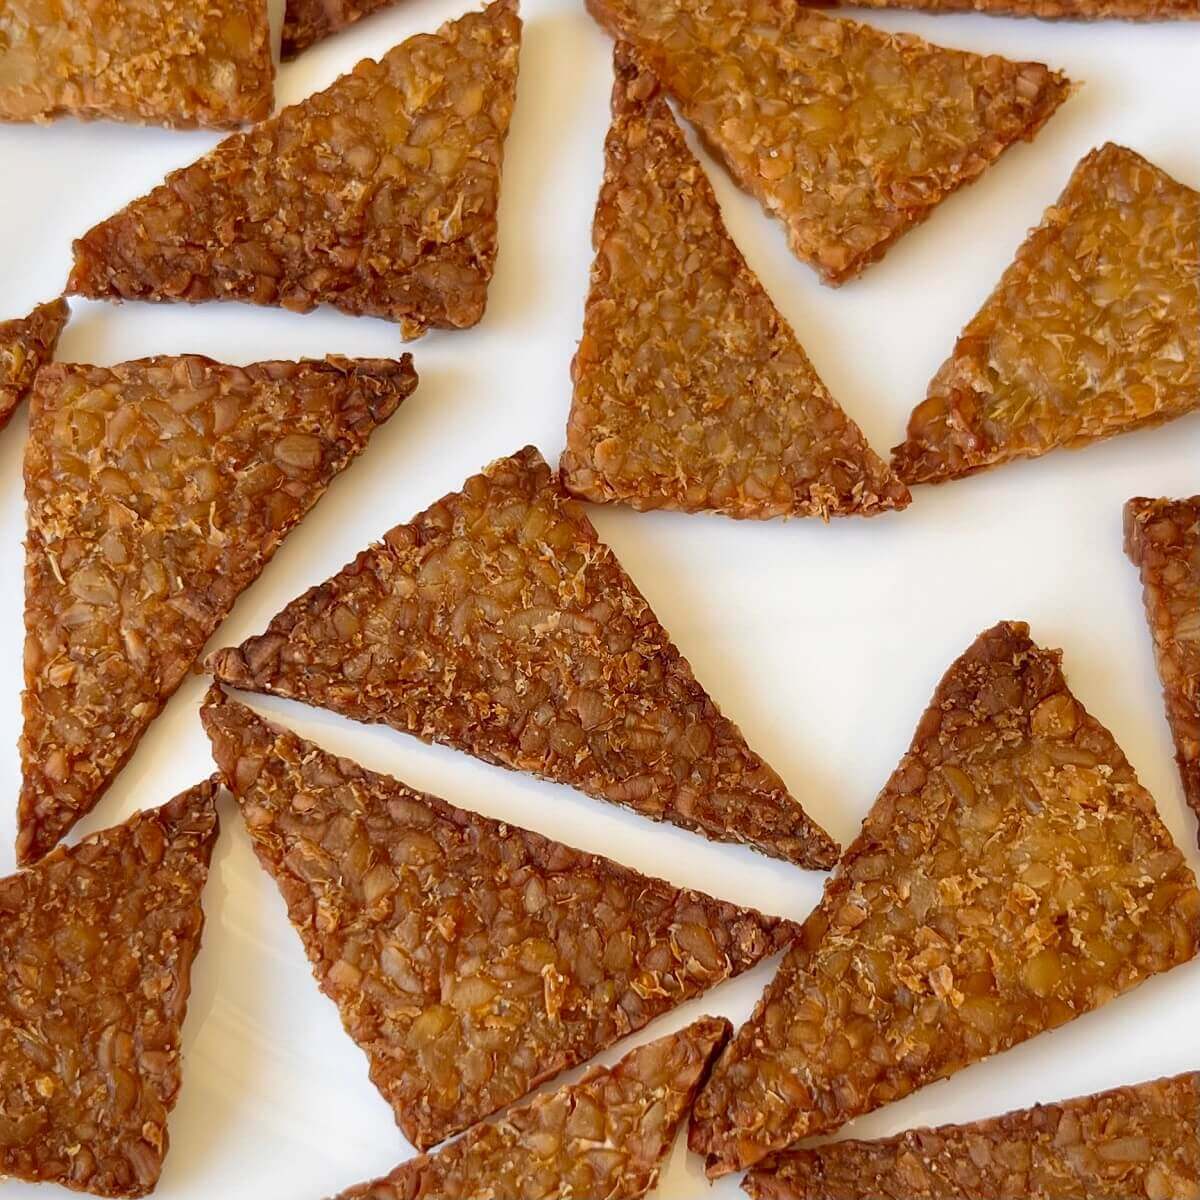 Crispy pieces of tempeh on a white plate.